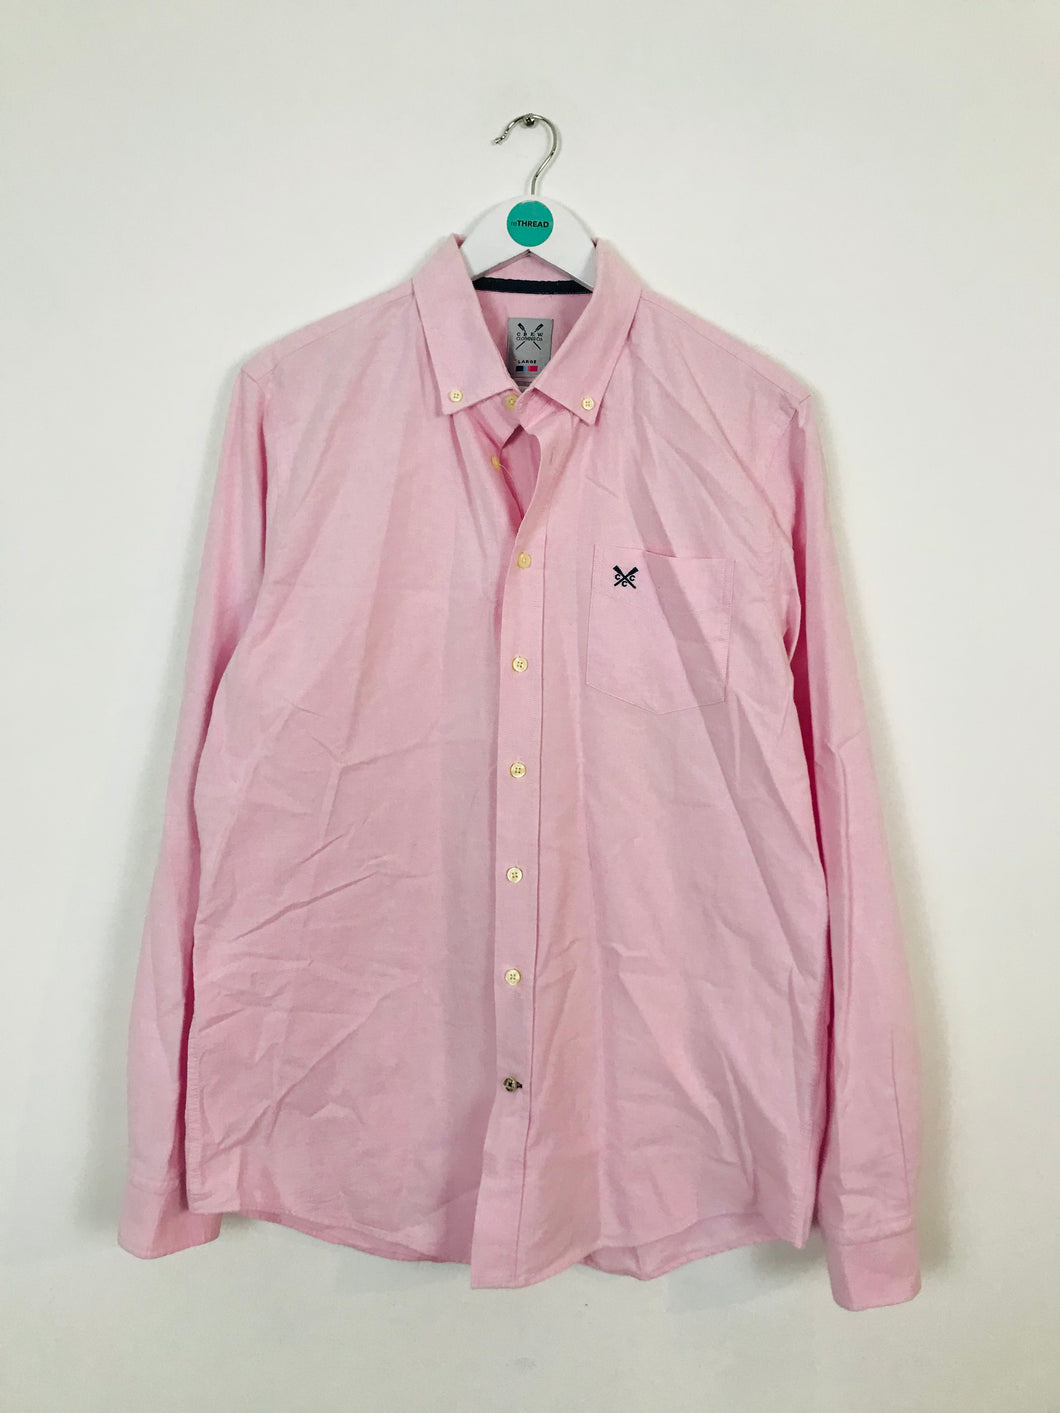 Crew Clothing Men’s Tailored Fit Classic Shirt | L | Pink